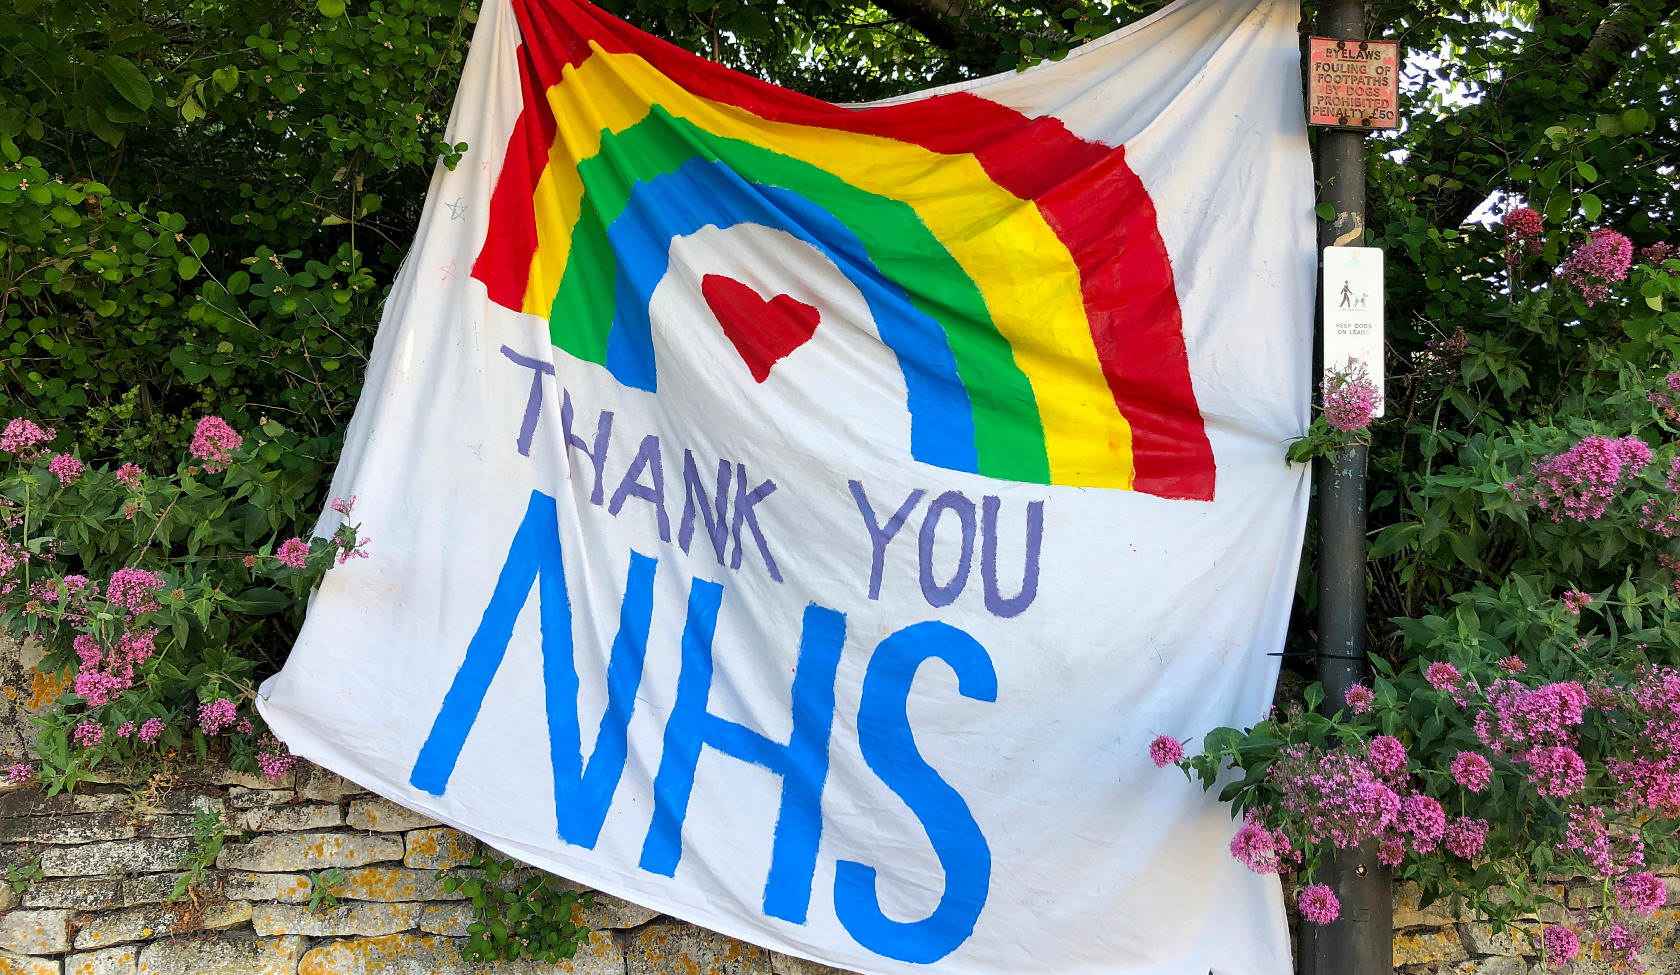 Photograph of a painted 'Thank You NHS' banner, used during the Corona Virus pandemic